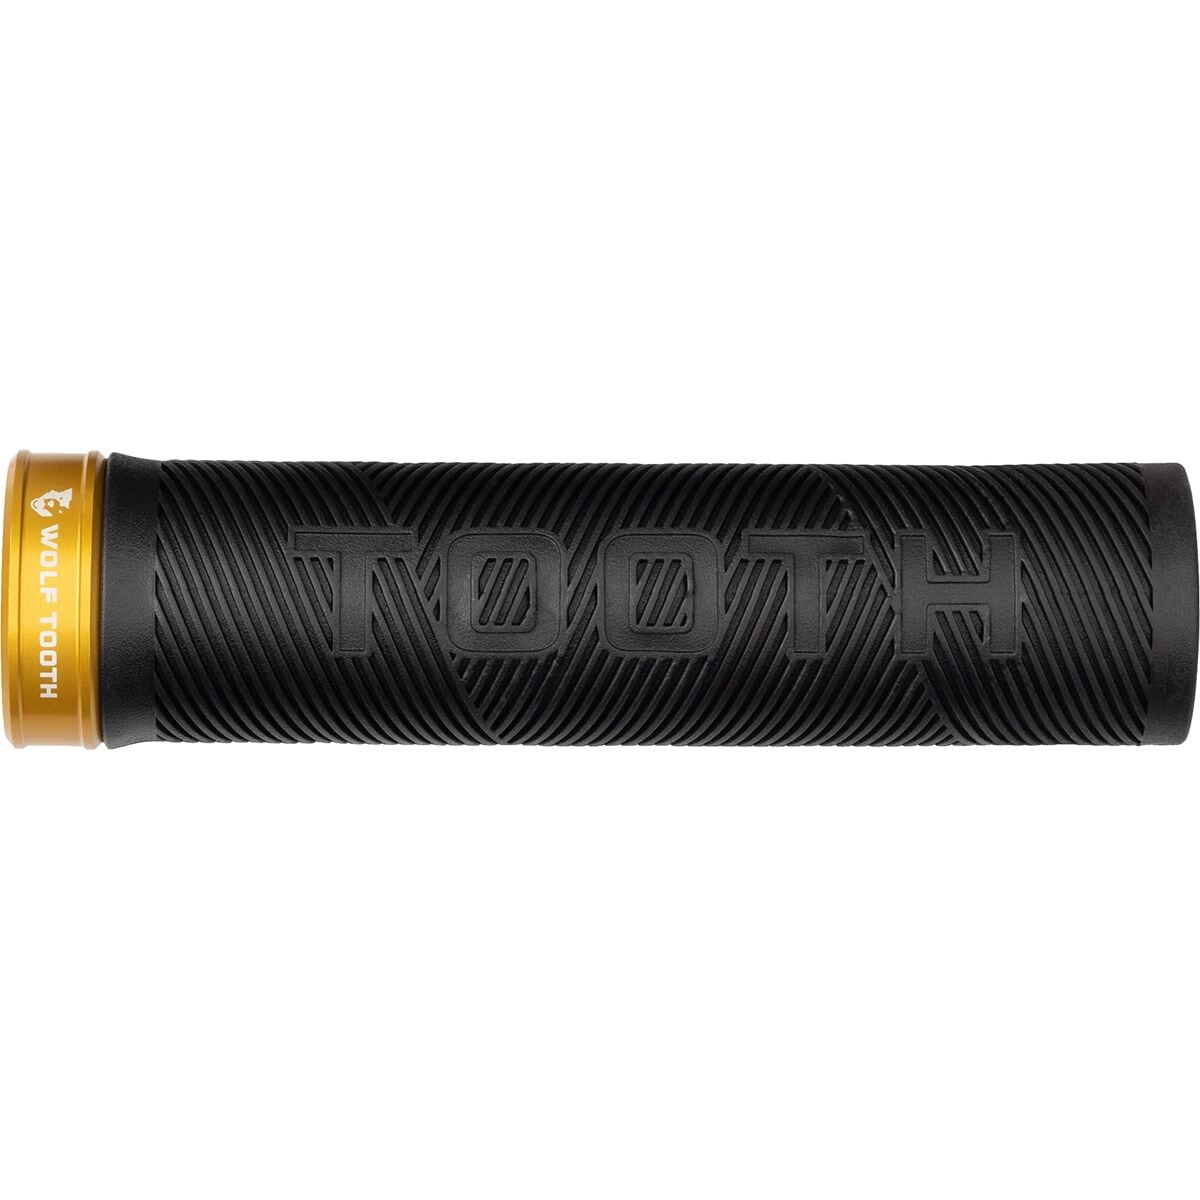 Wolf Tooth Components Wolf Tooth Echo Lock-On Grip Black Grip/Gold Collar, One Size